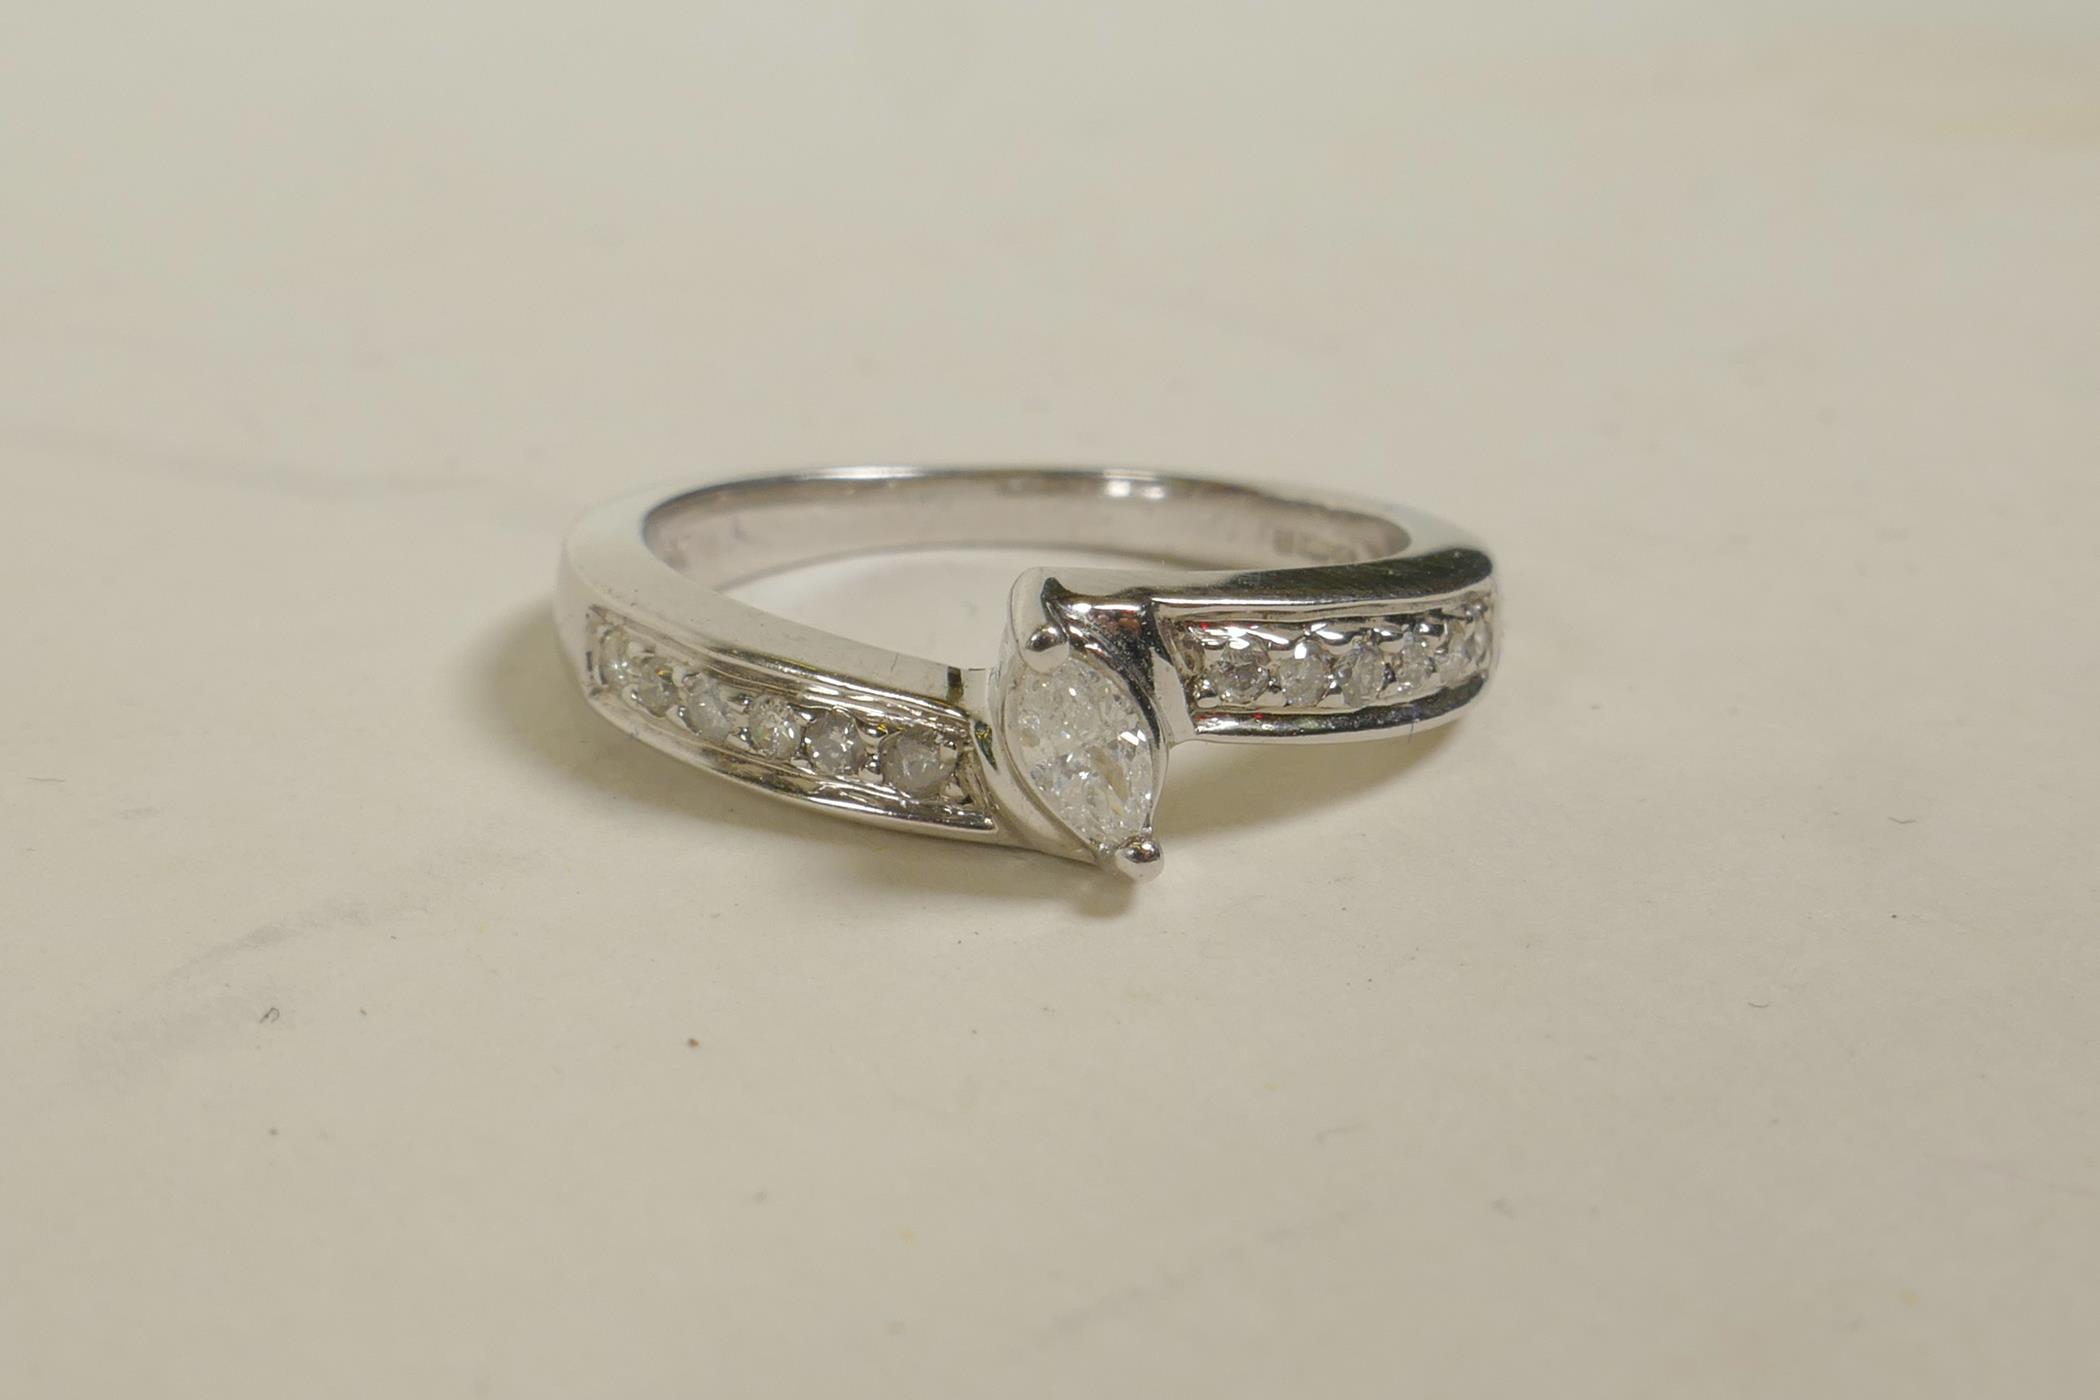 A 9ct white gold diamond dress ring, approximate size 'M/N'